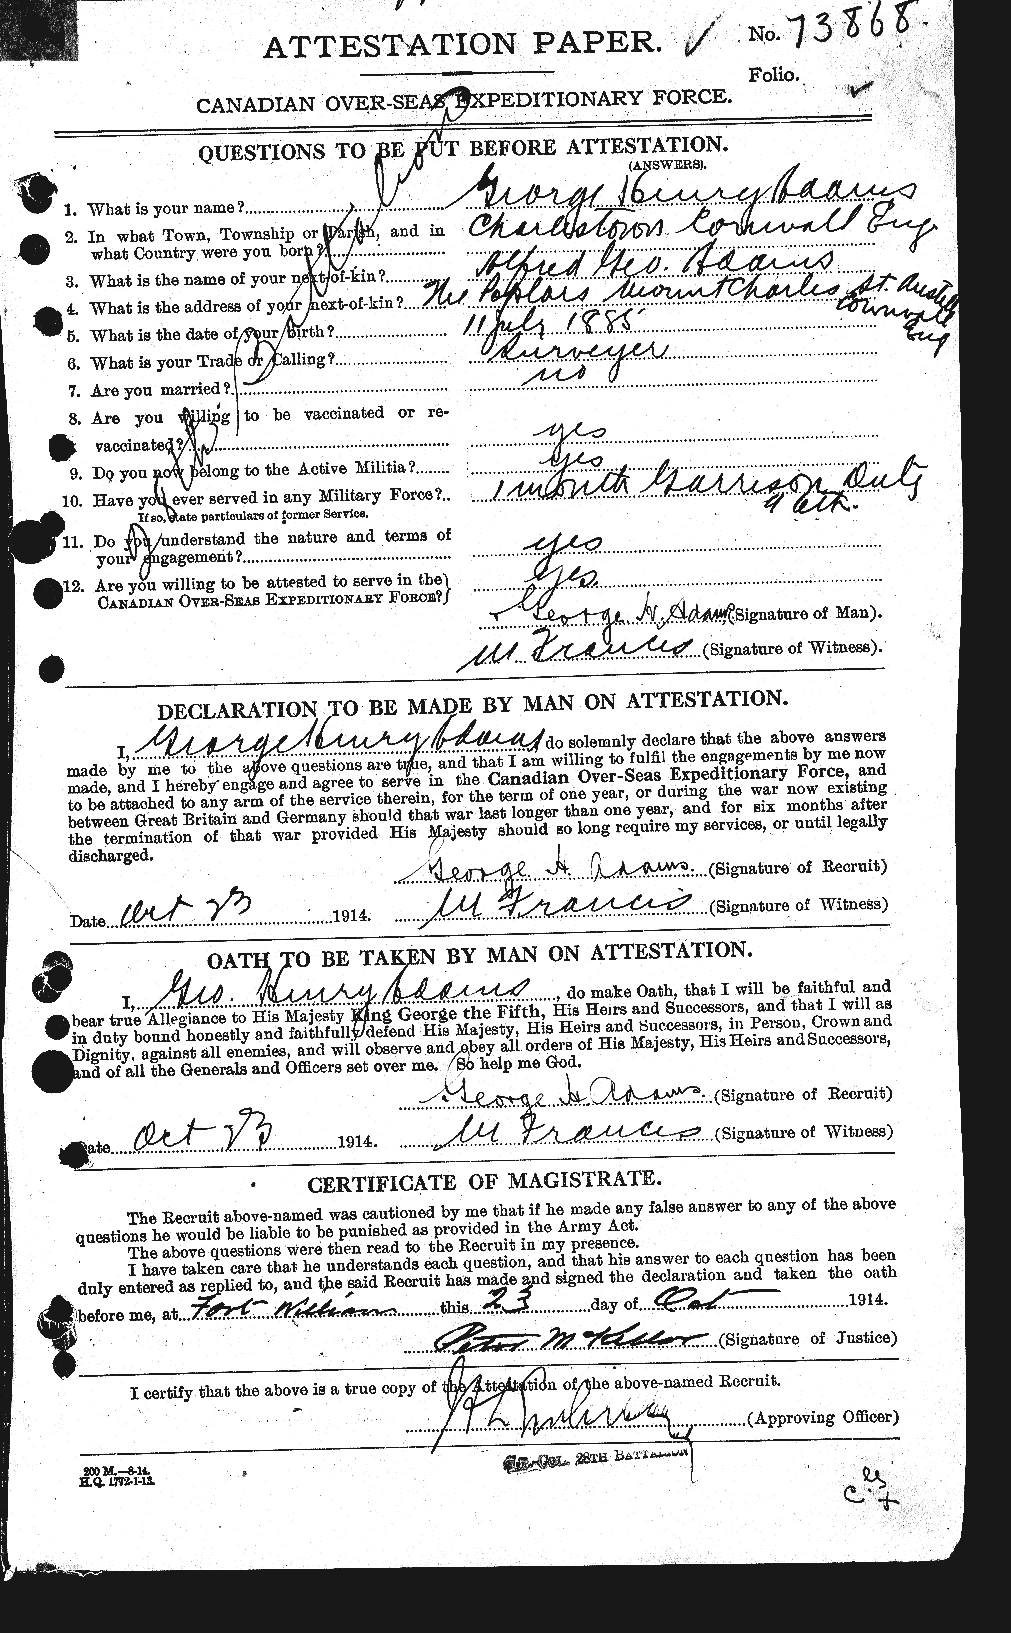 Personnel Records of the First World War - CEF 203109a